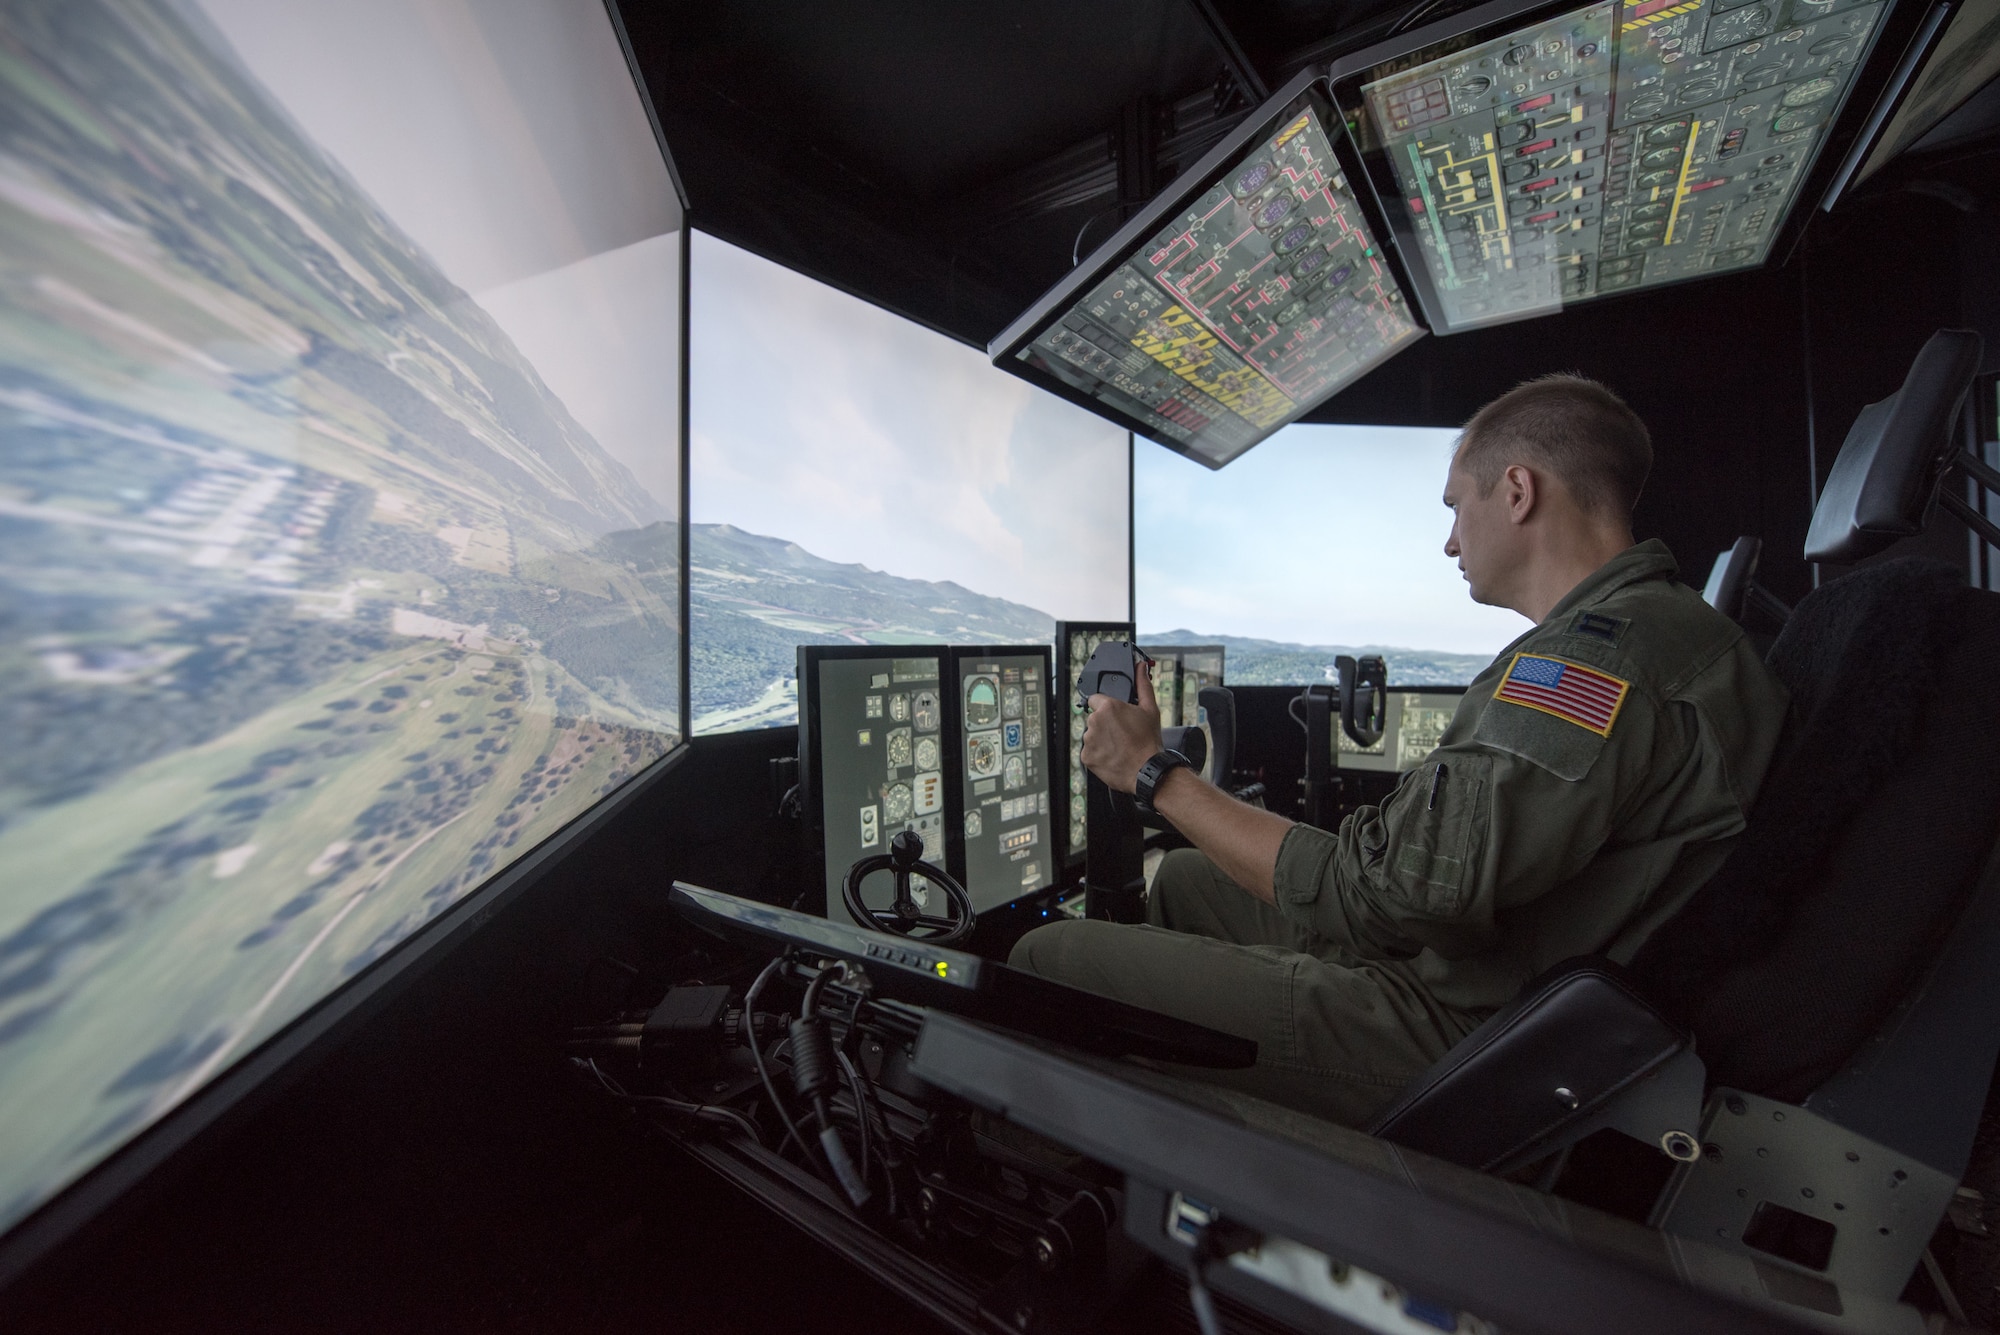 U.S. Air Force Capt. Tristan Stonger, a pilot from the Kentucky Air National Guard’s 165th Airlift Squadron, uses a C-130 simulator for training at the Kentucky Air National Guard Base in Louisville, Ky., Aug. 28, 2019. Known as the Multi-Mission Crew Trainer, the system helps prepare Airmen for handling in-flight emergencies. (U.S. Air National Guard photo by Phil Speck)